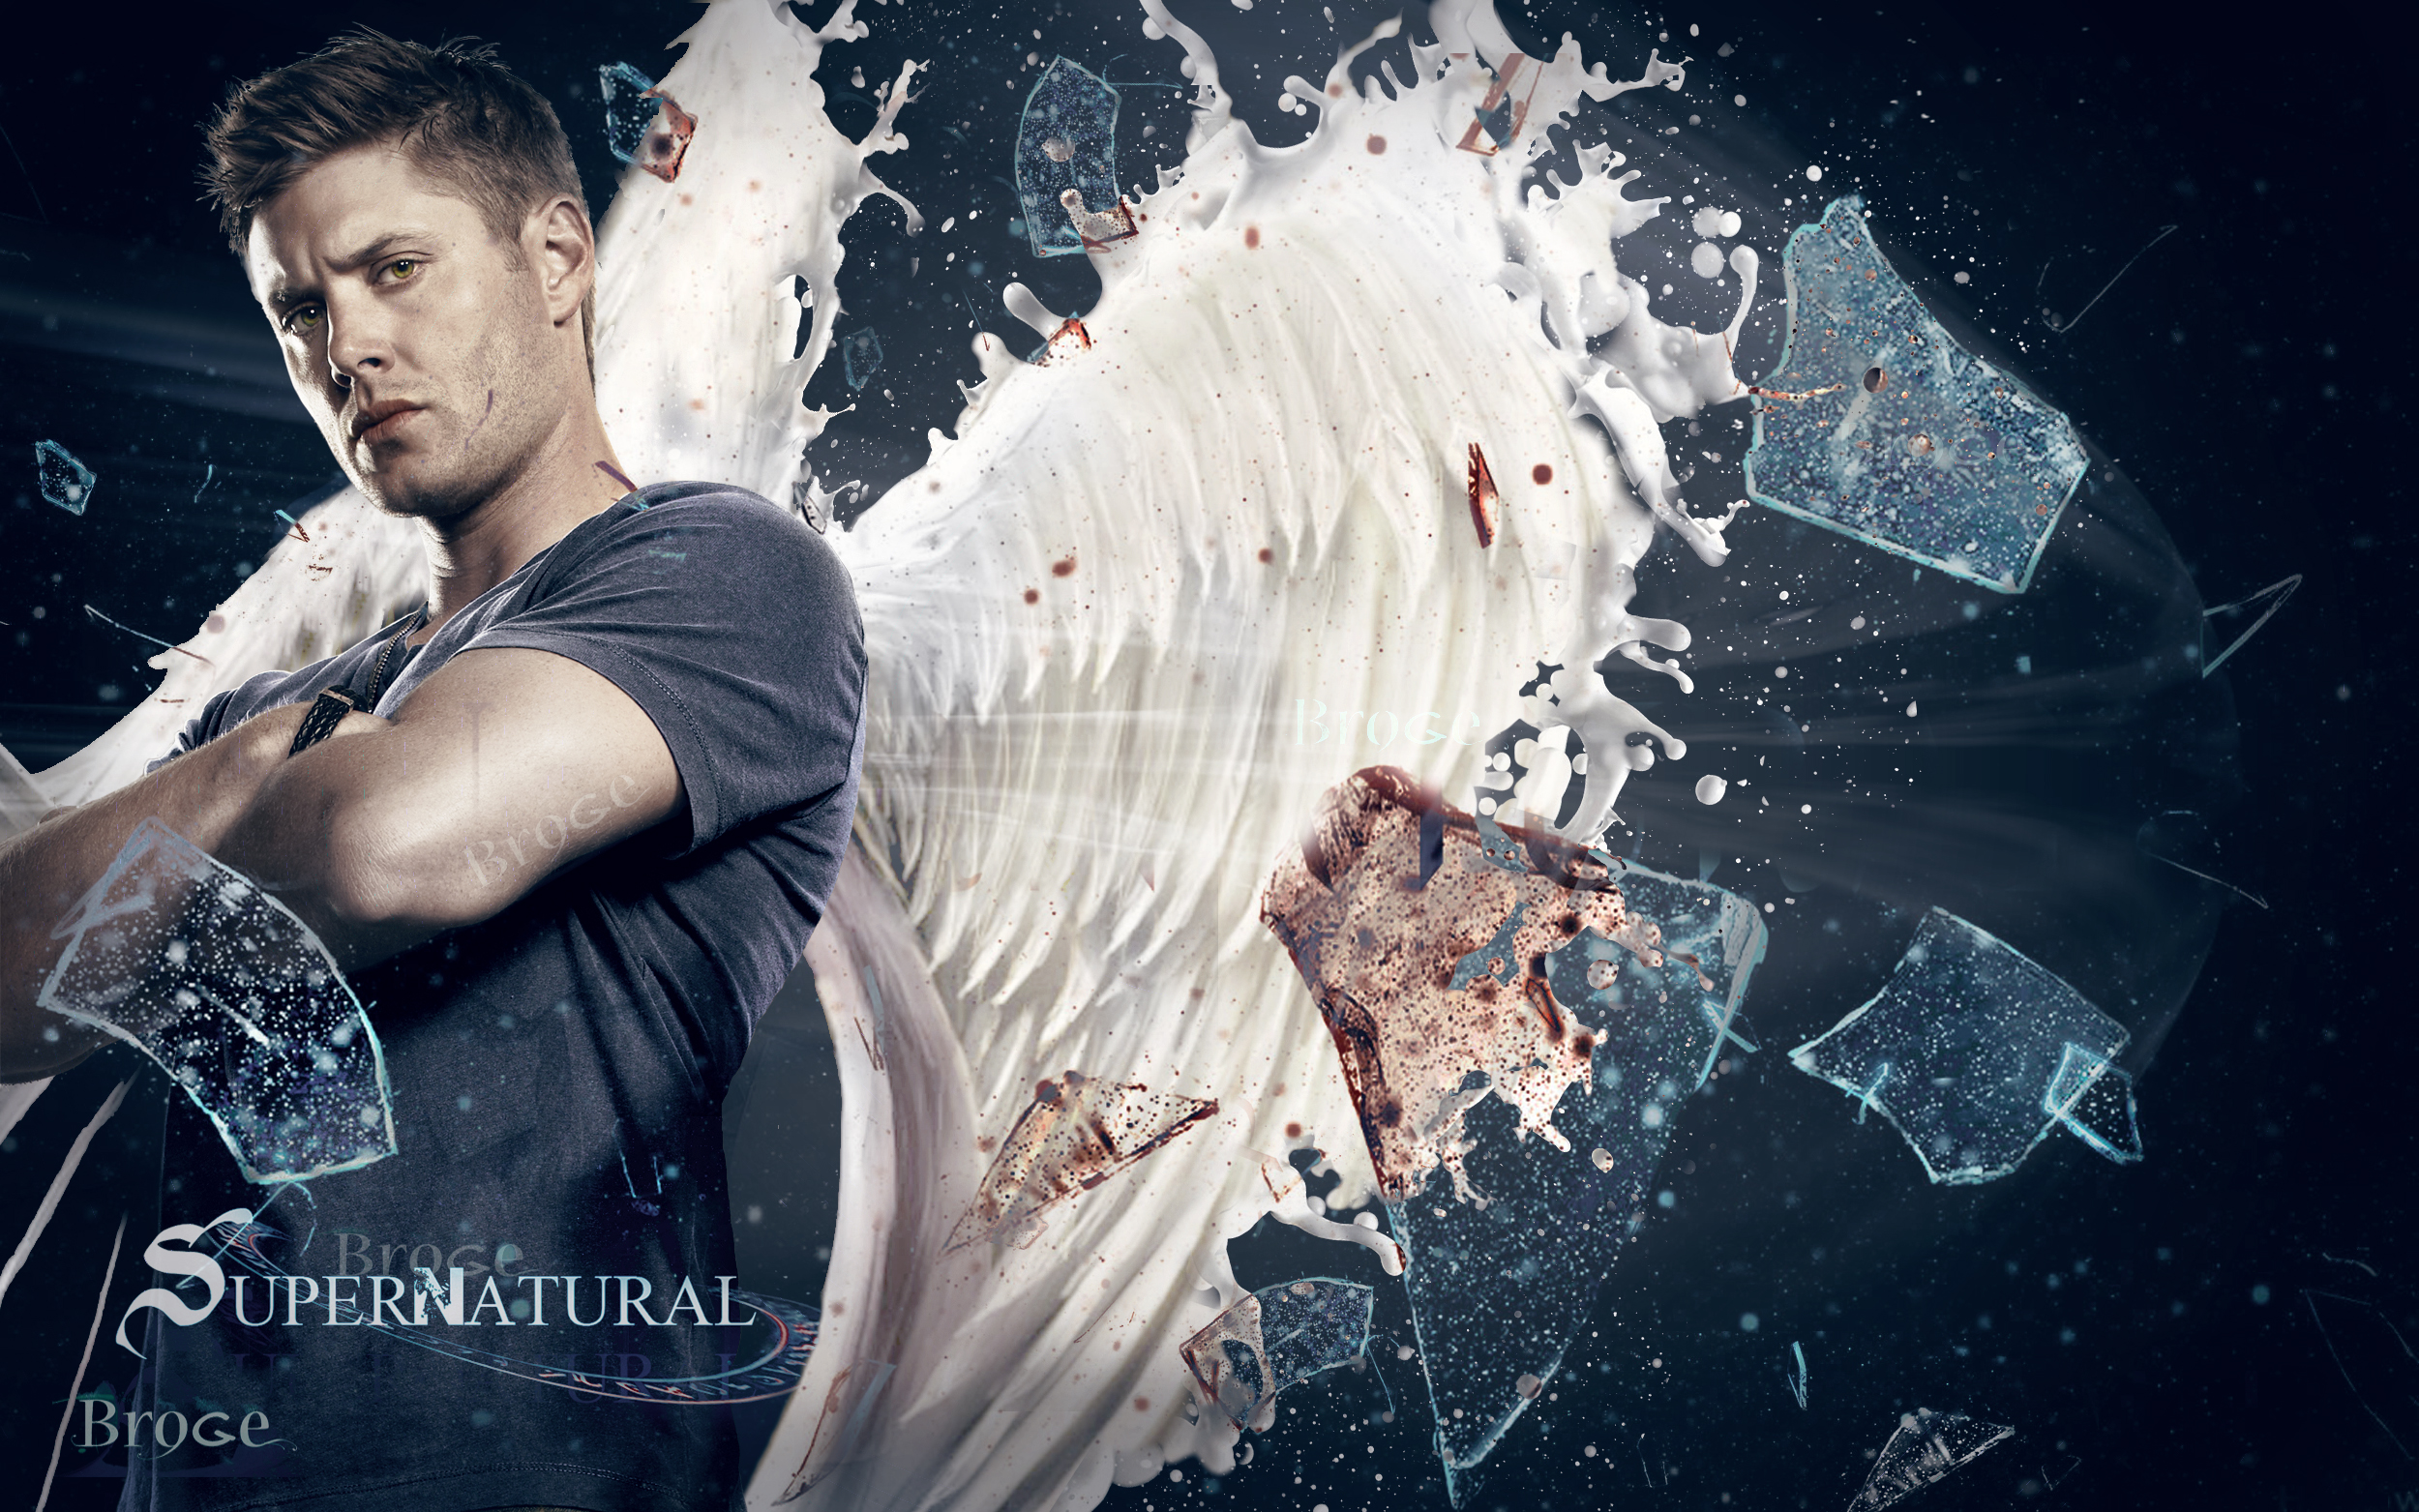 Dean Winchester Wallpapers  Wallpaper Cave